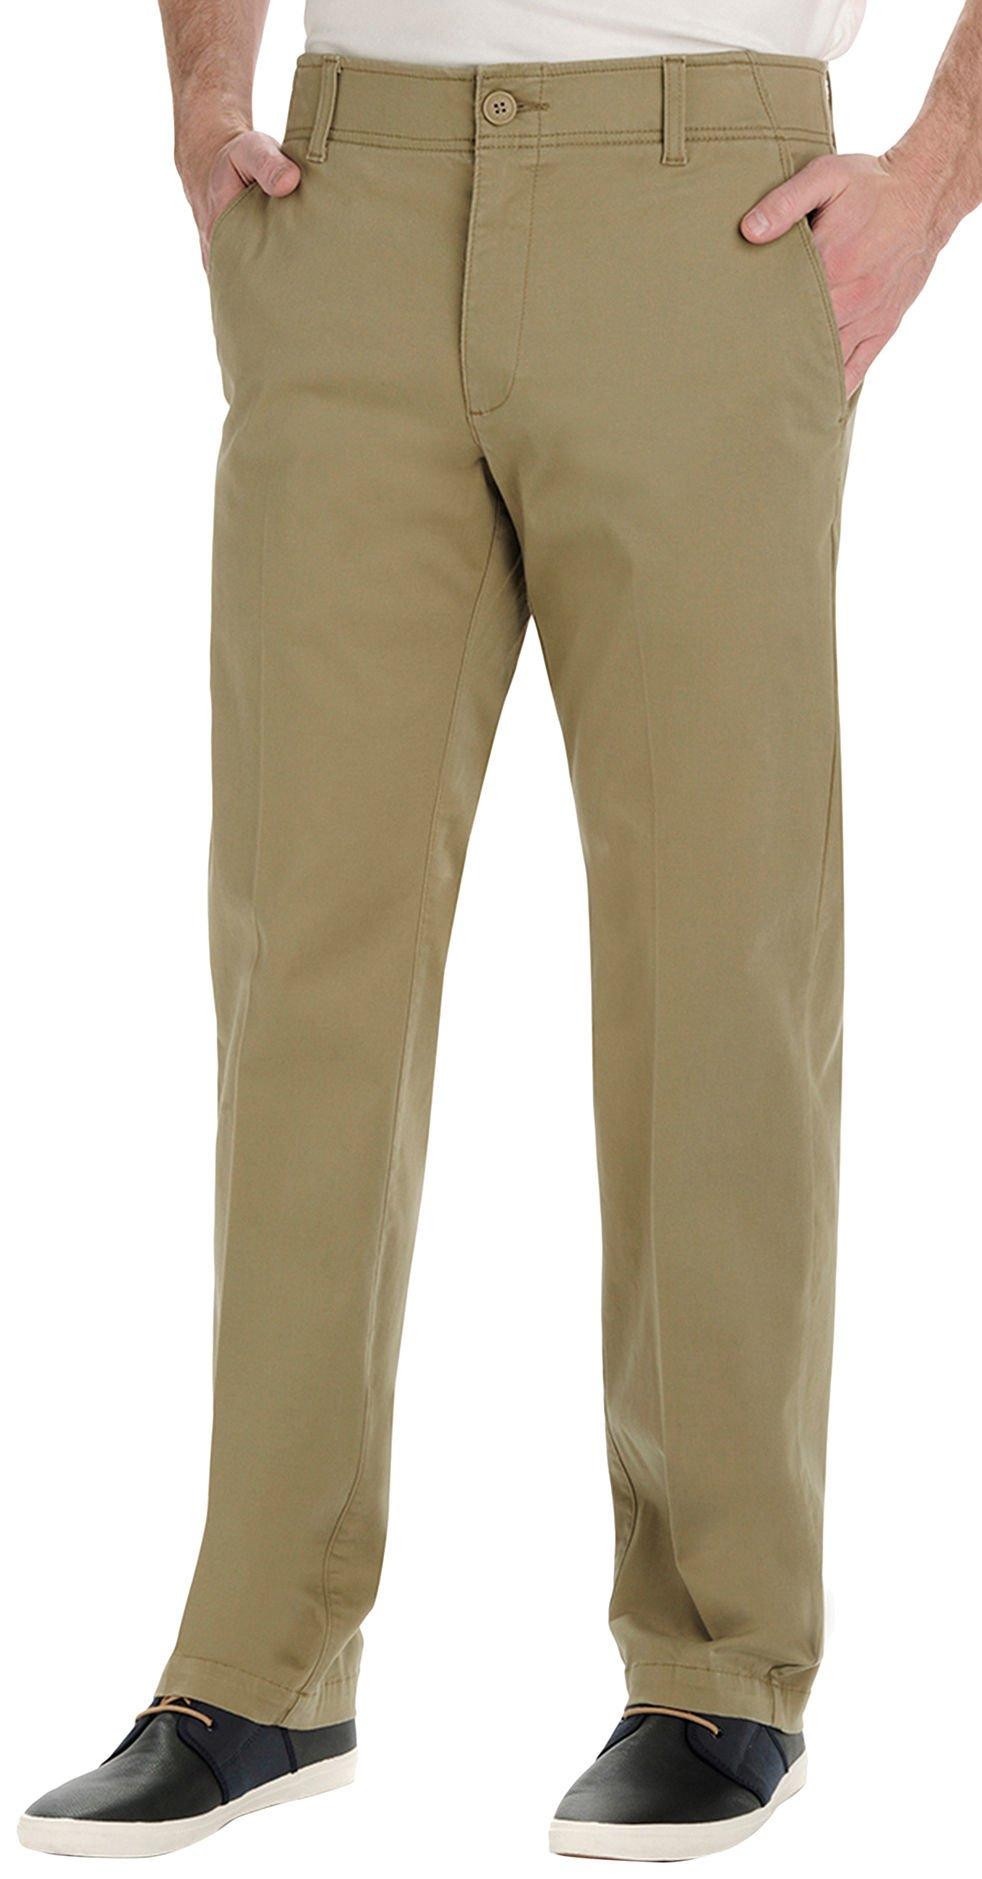 Lee Mens Extreme Comfort Straight Fit Pants